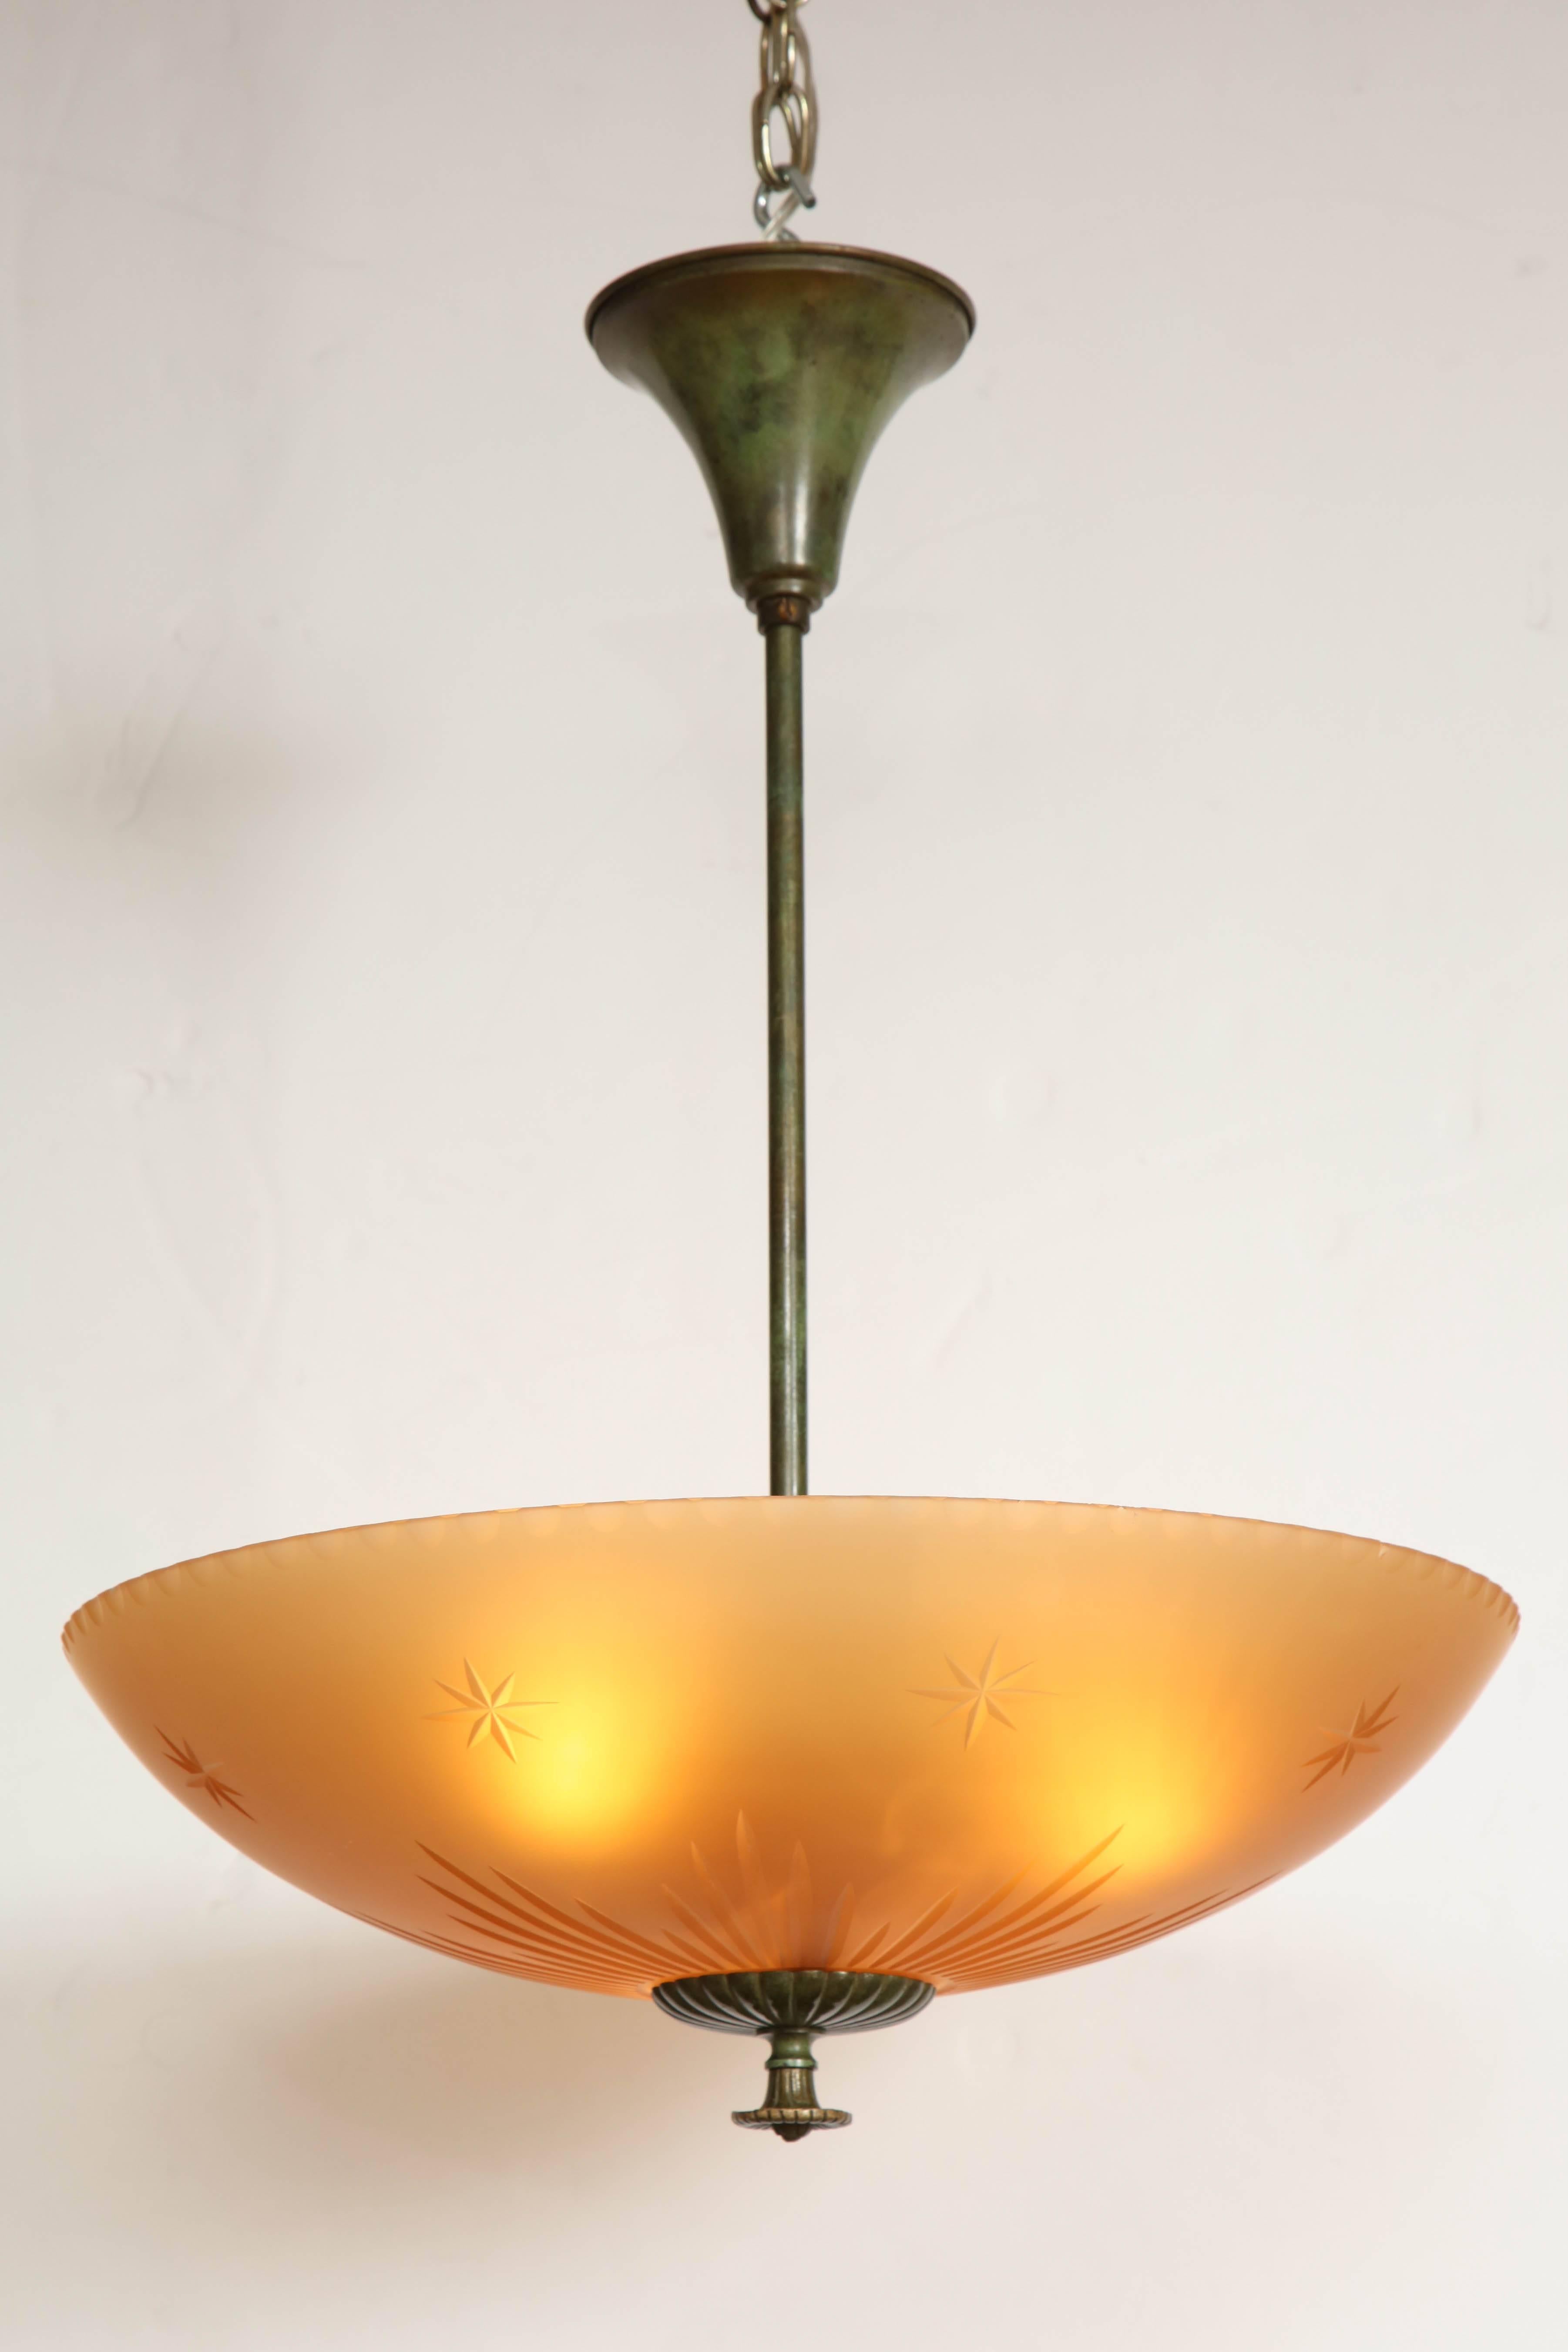 A Swedish patinated brass and amber cut-glass pendant, circa 1940s, with a plain rod stem supporting a glass bowl form shade with cut stars and channels, ending with a patinated brass gadrooned plate and finial. 

Rewired for the US 3 x 60watts